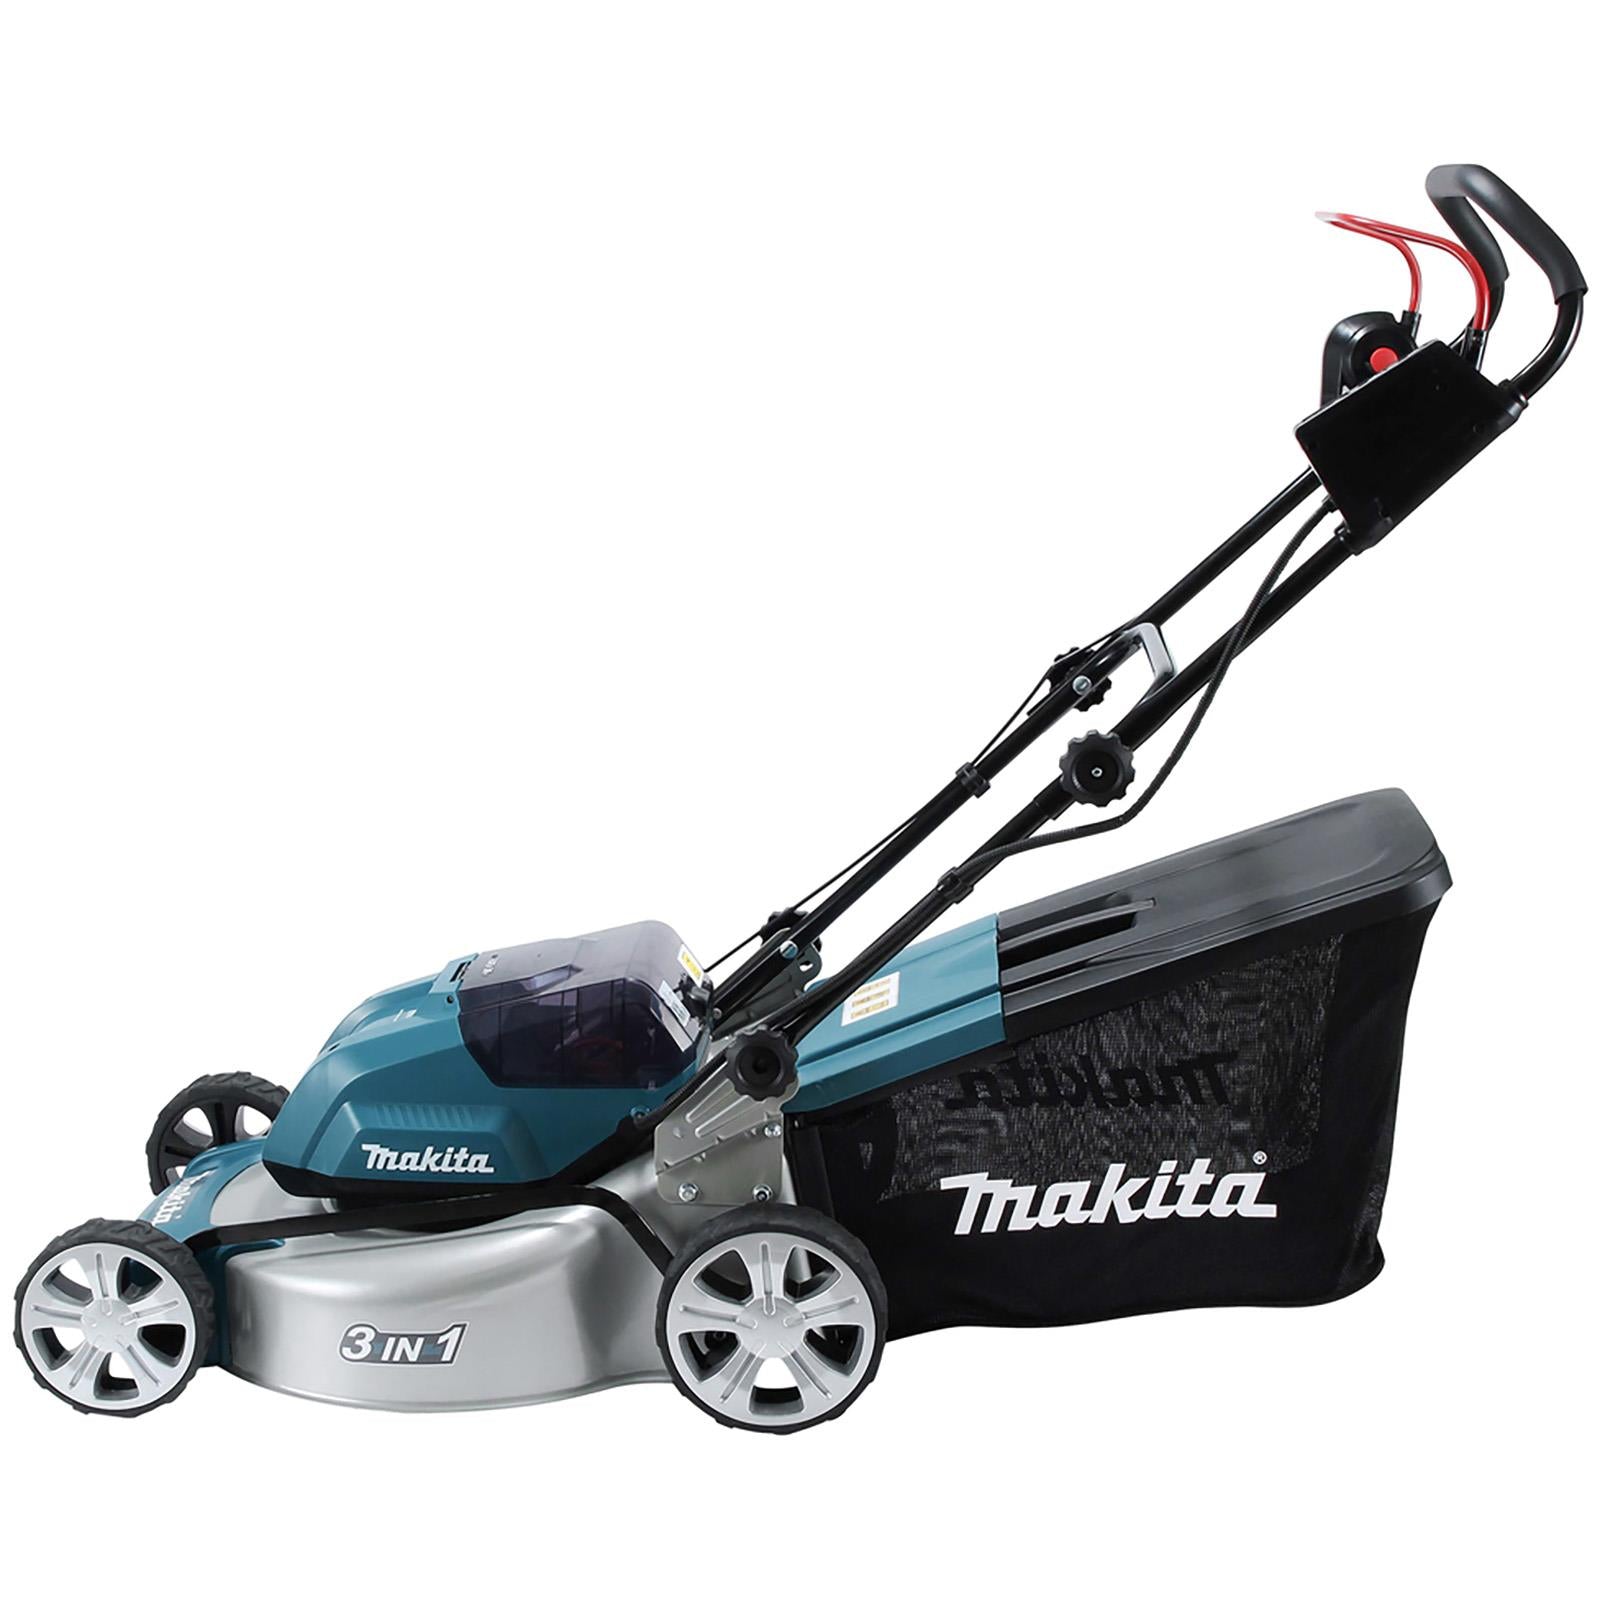 Makita 46cm Lawn Mower Kit Twin 18V LXT Li-ion Cordless Garden Grass Outdoor 2 x 6Ah Battery and Dual Rapid Charger DLM460PG2